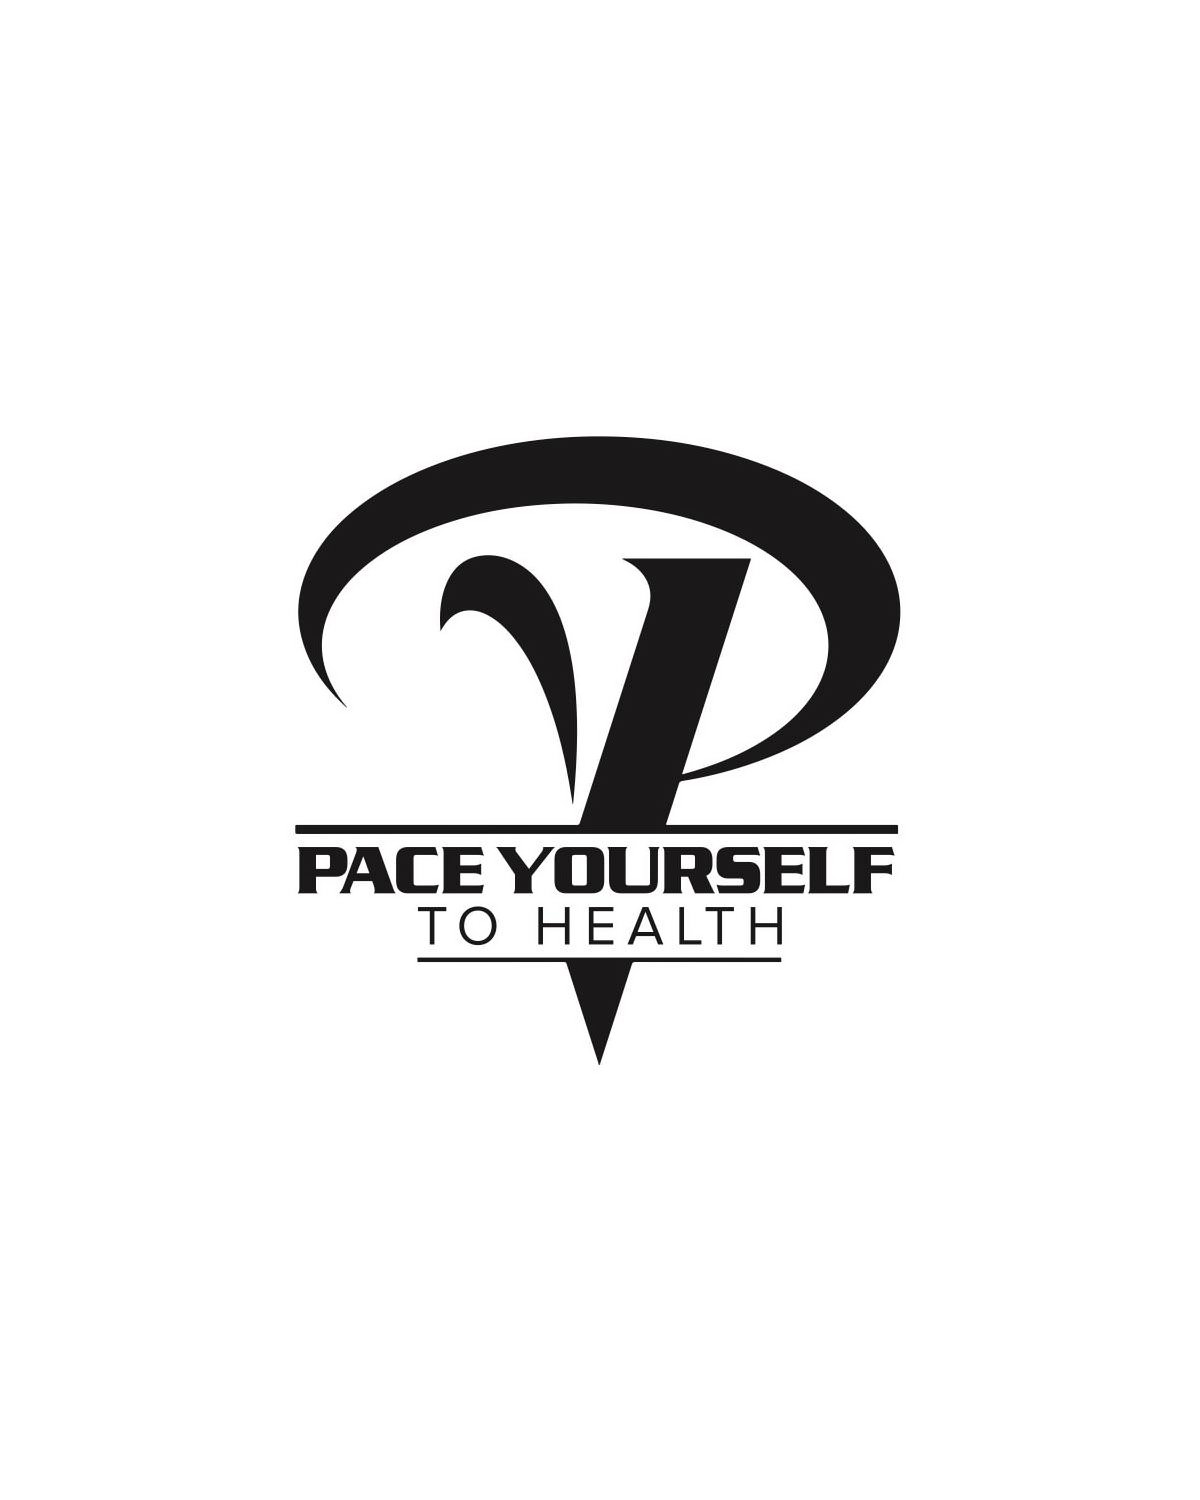 P PACE YOURSELF TO HEALTH